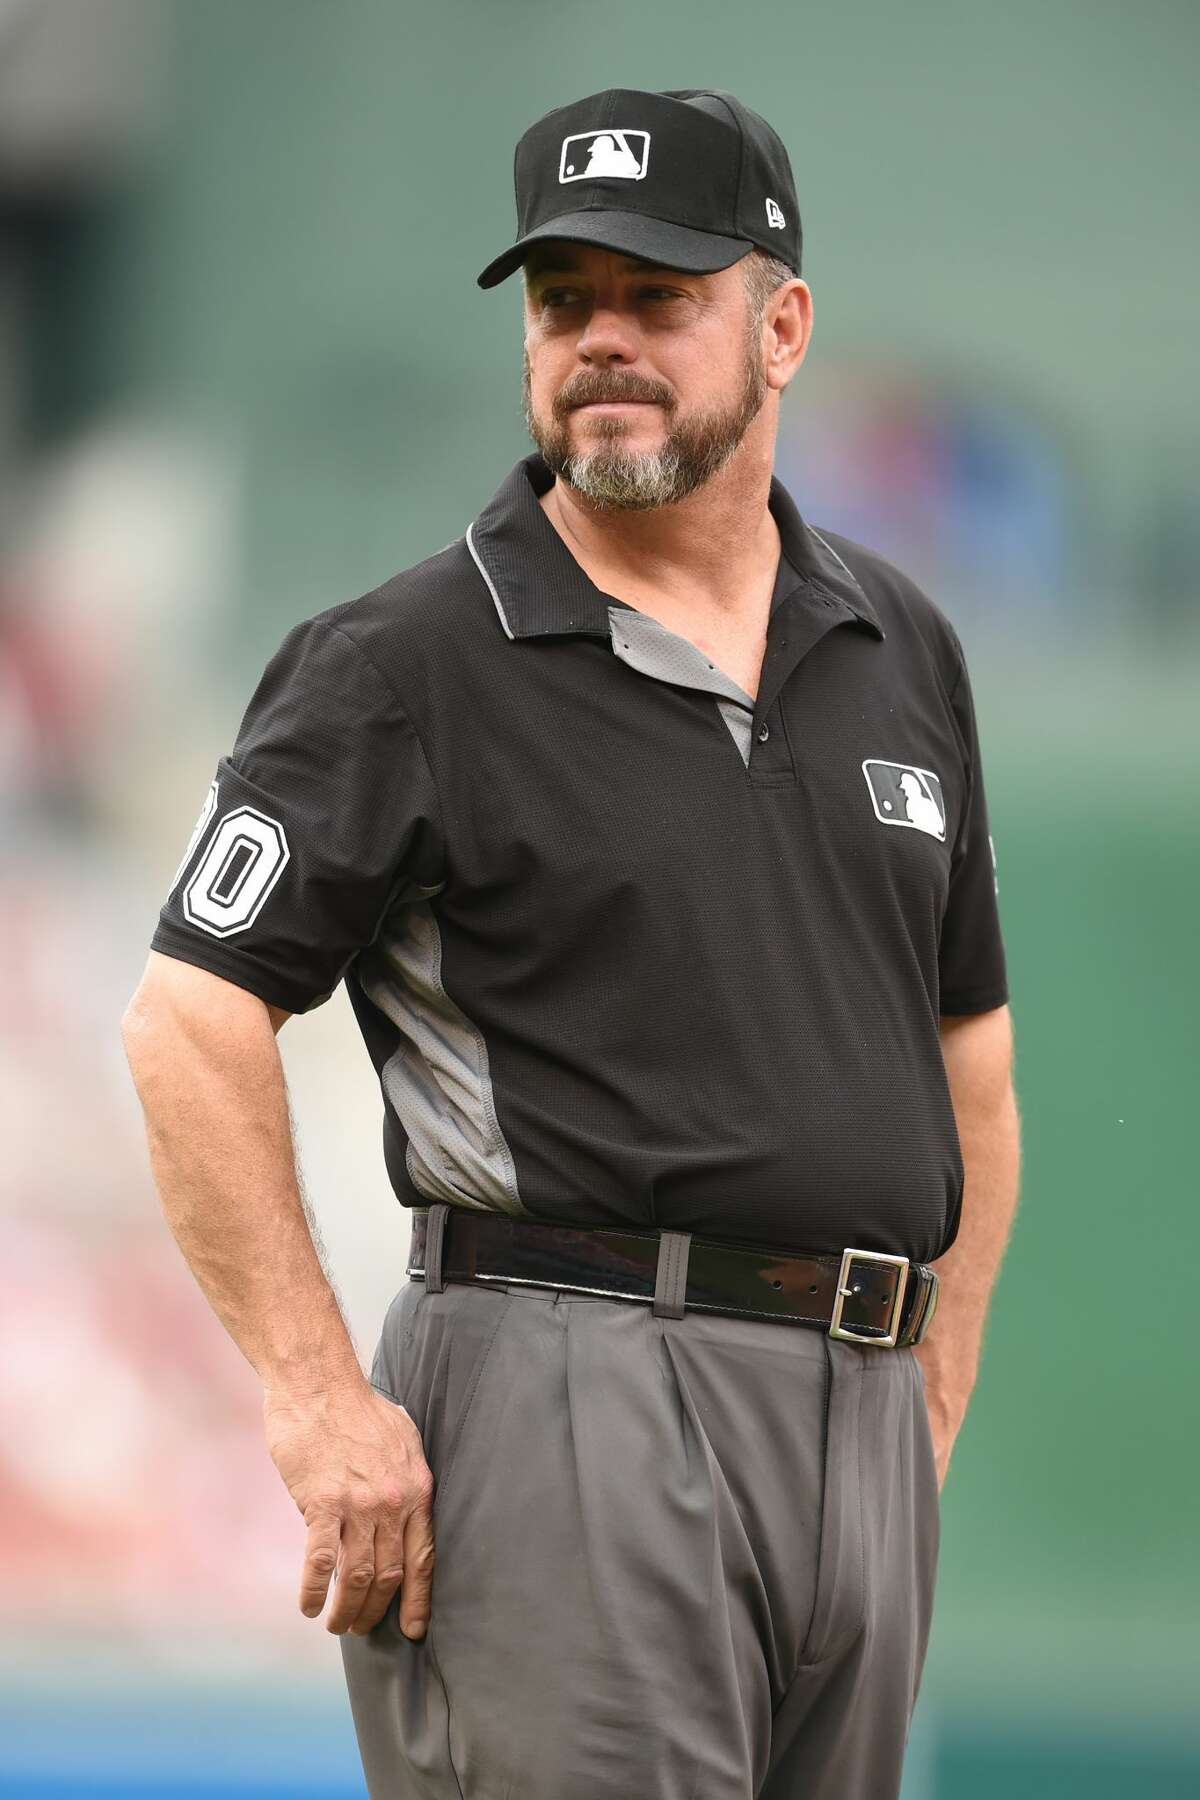 Umpire Rob Drake looks on during a baseball game between the Atlanta Braves and the Washington Nationals at Nationals Park on September 14, 2019 in Washington, DC. (Photo by Mitchell Layton/Getty Images)